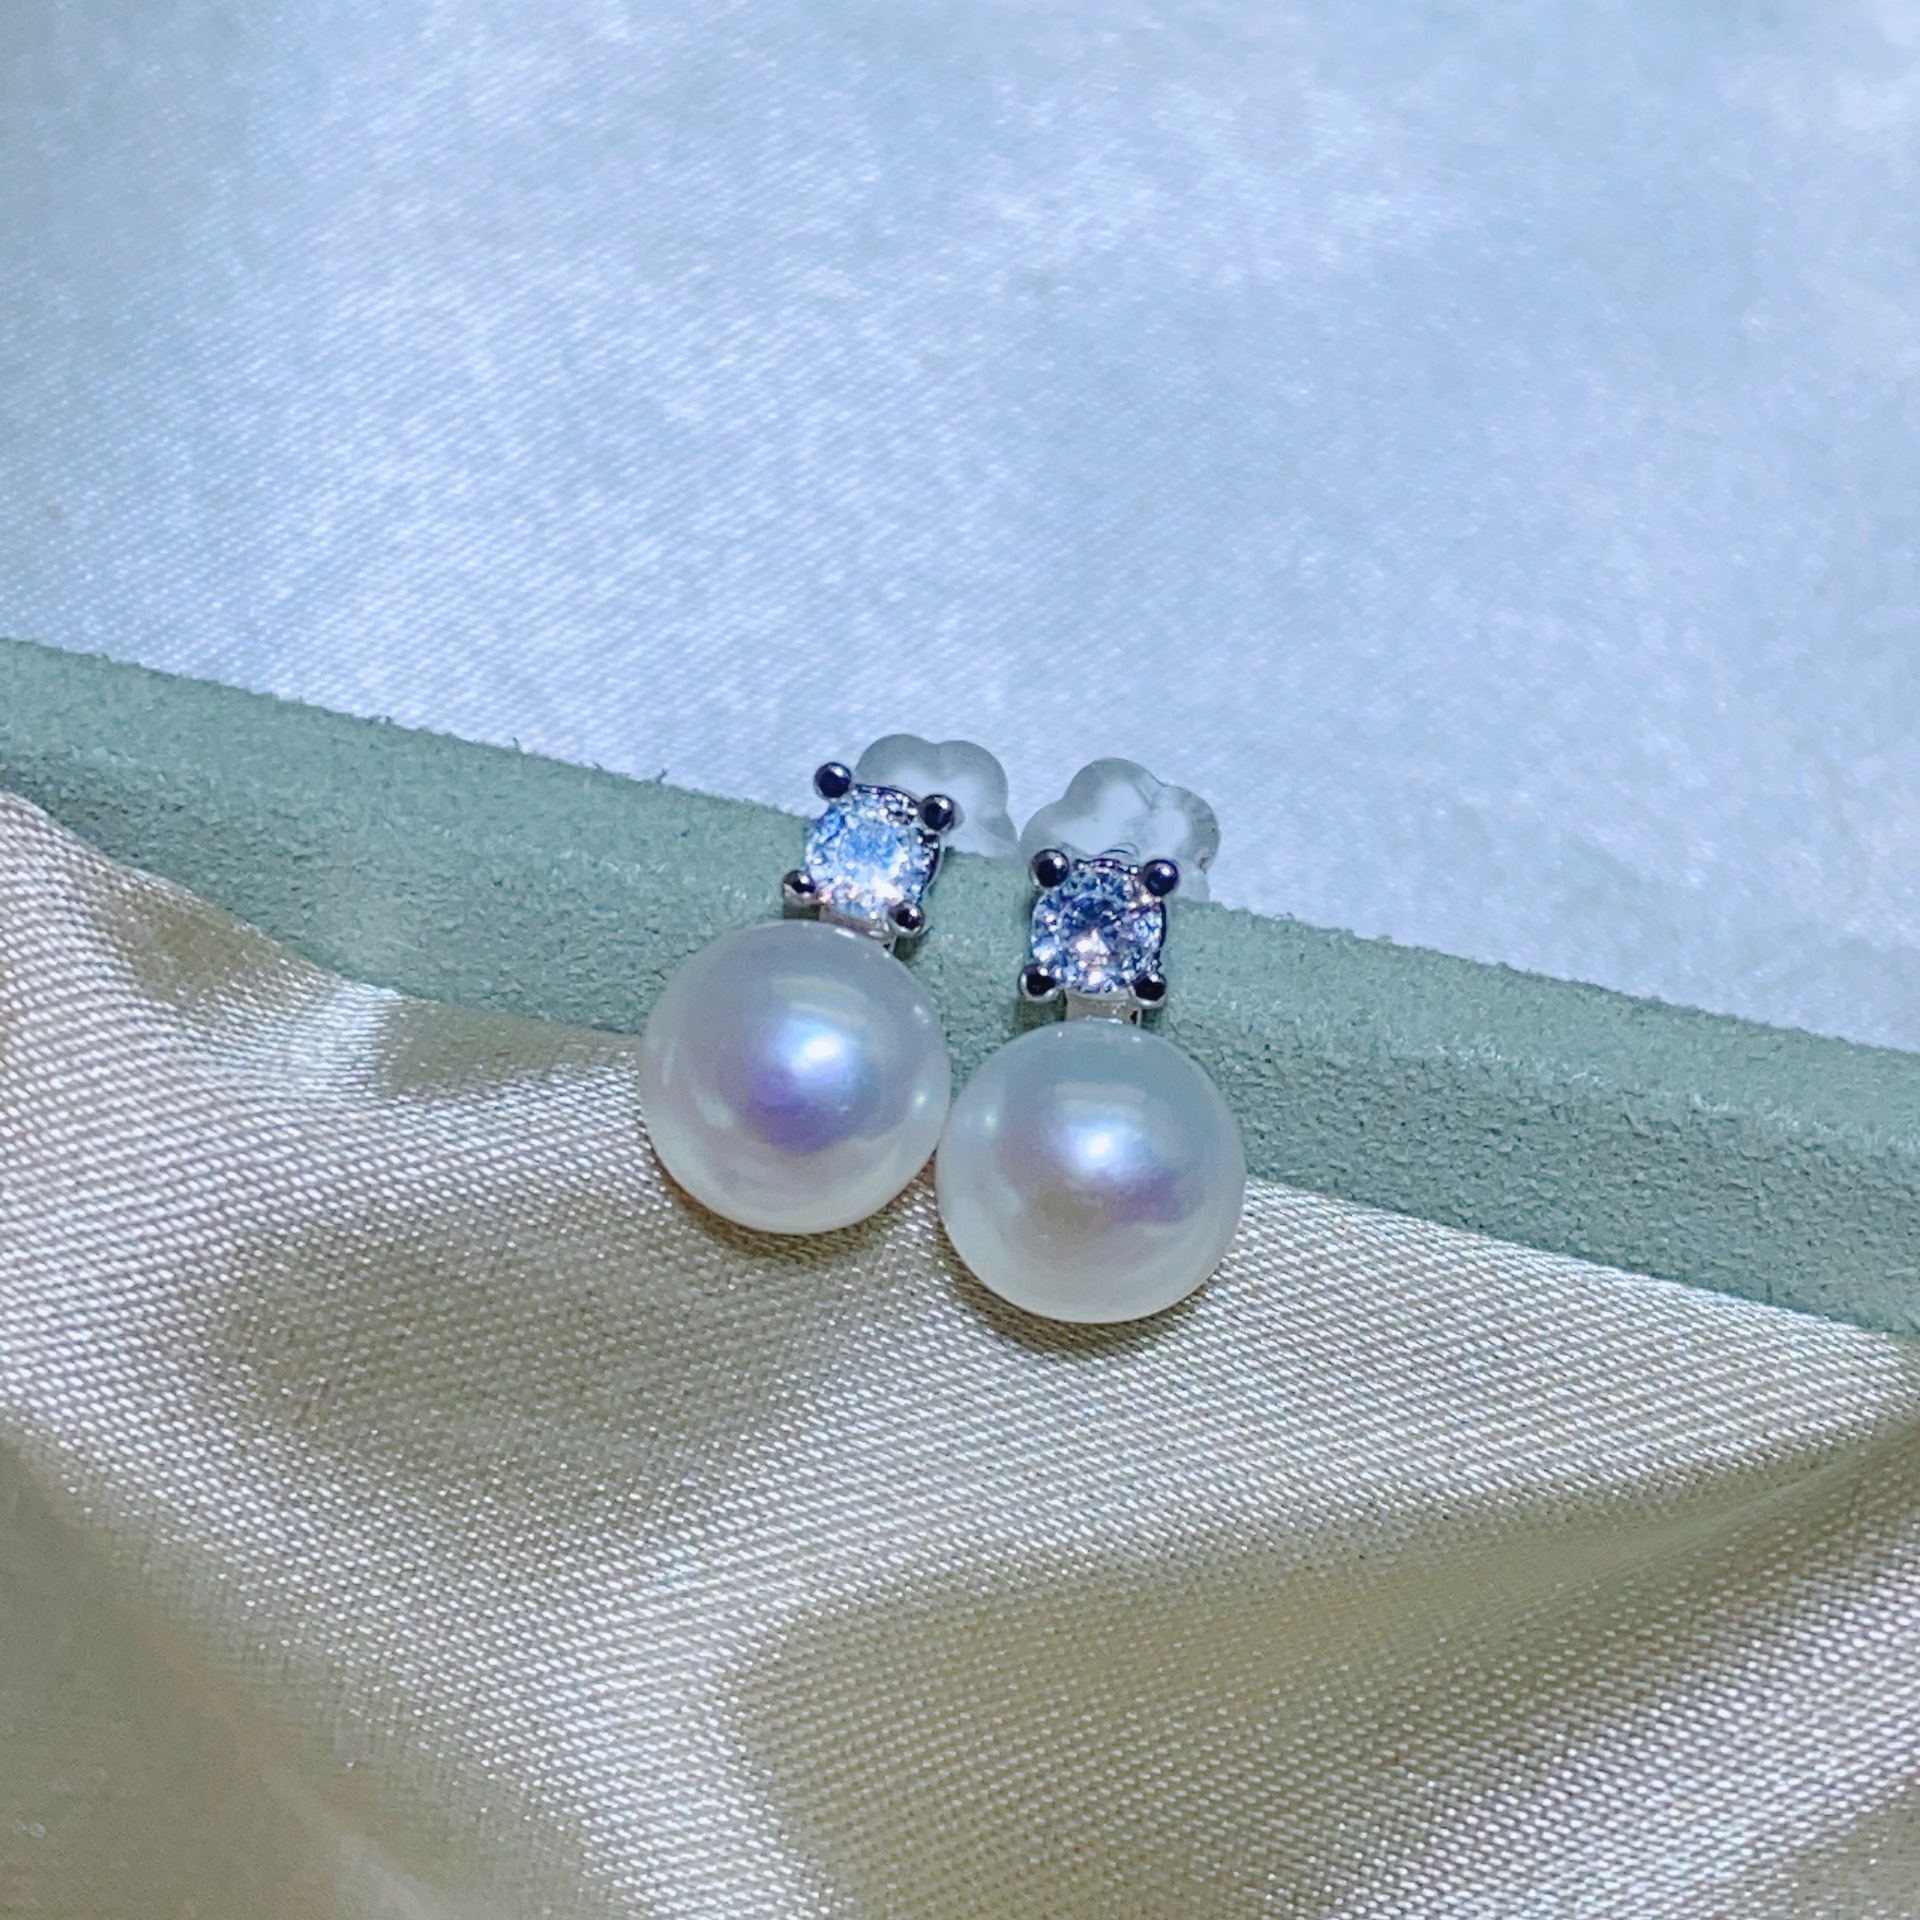 Classic Princess Style Sterling Silver Needle Stud Earrings Natural Freshwater Pearl 7-8mm Surface Basically Flawless Pearl Earrings